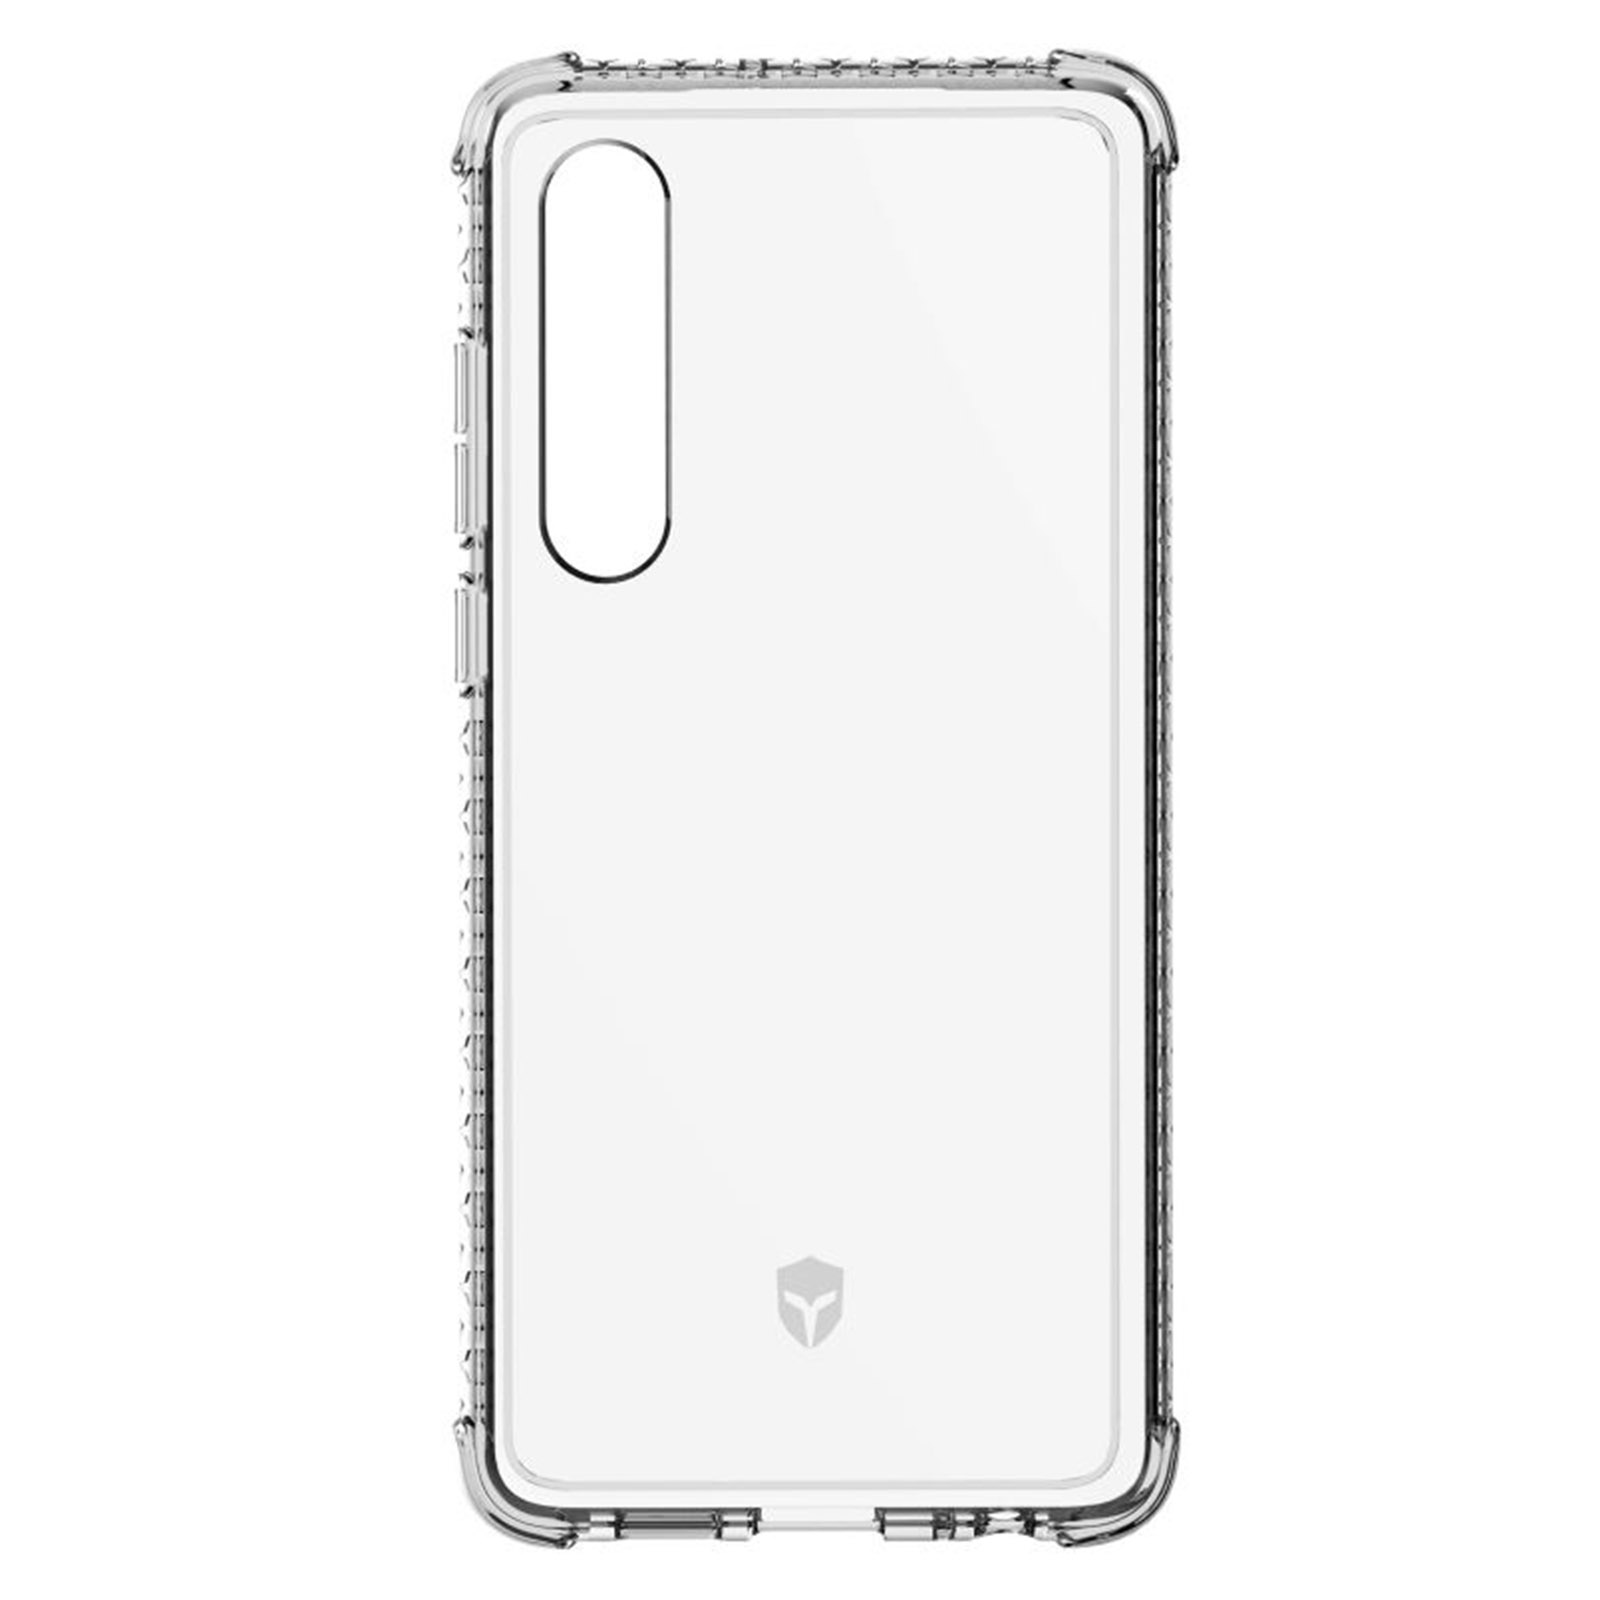 P30, Series, Handyhülle FORCE Huawei Backcover, Transparent CASE Huawei, Air